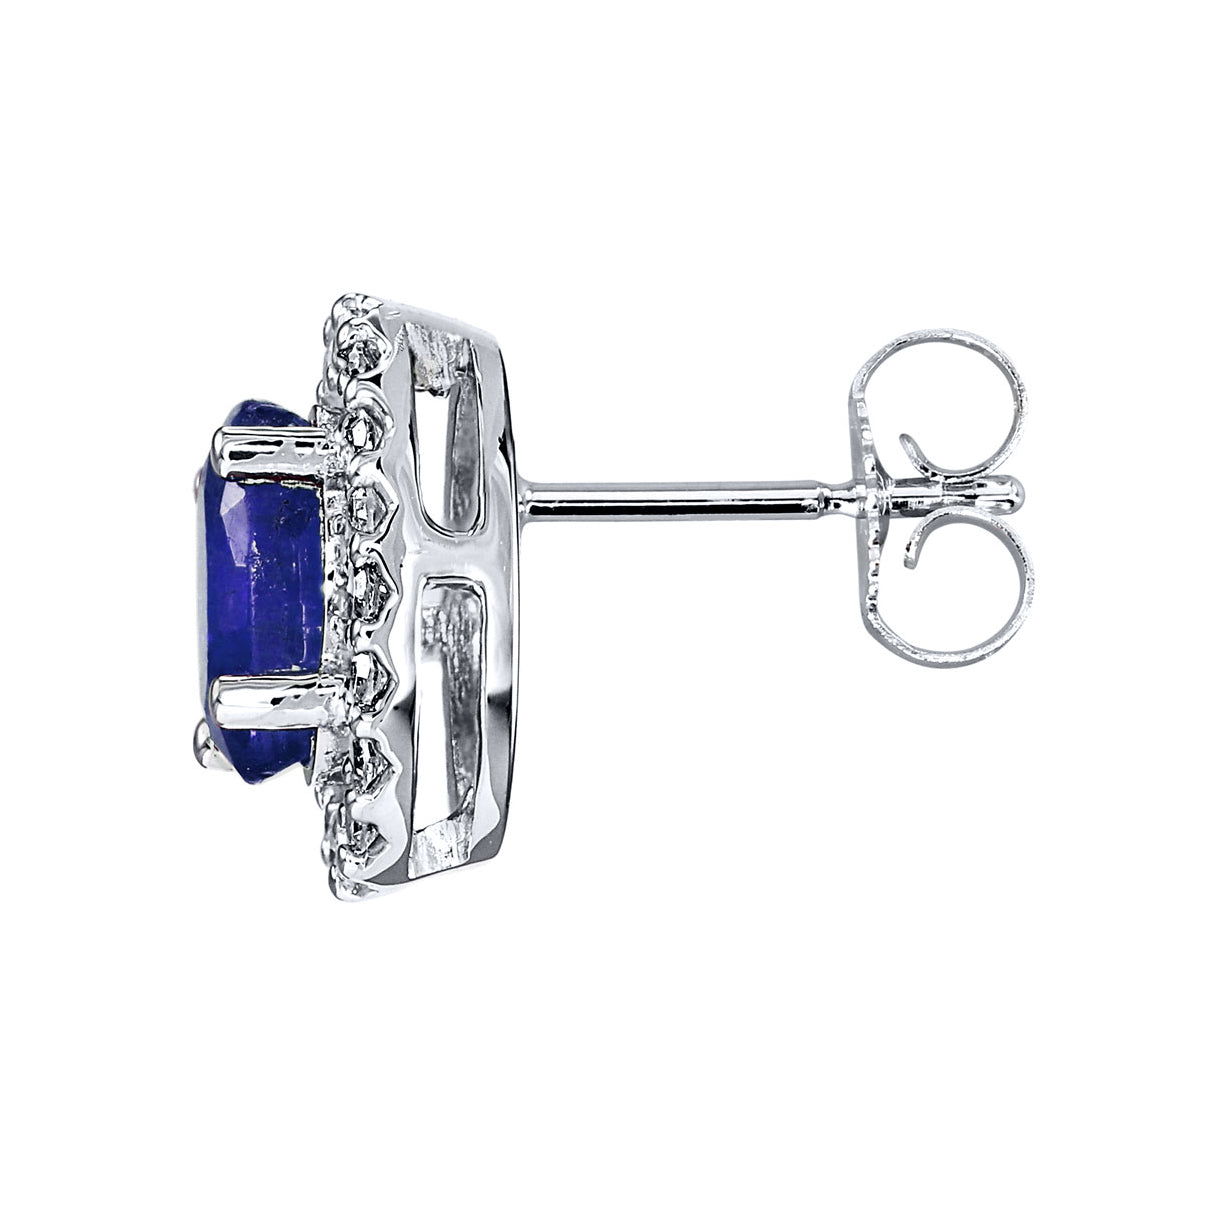 Oval Sapphire and Diamond Halo Earrings in 10K White Gold (0.21 ct tw)